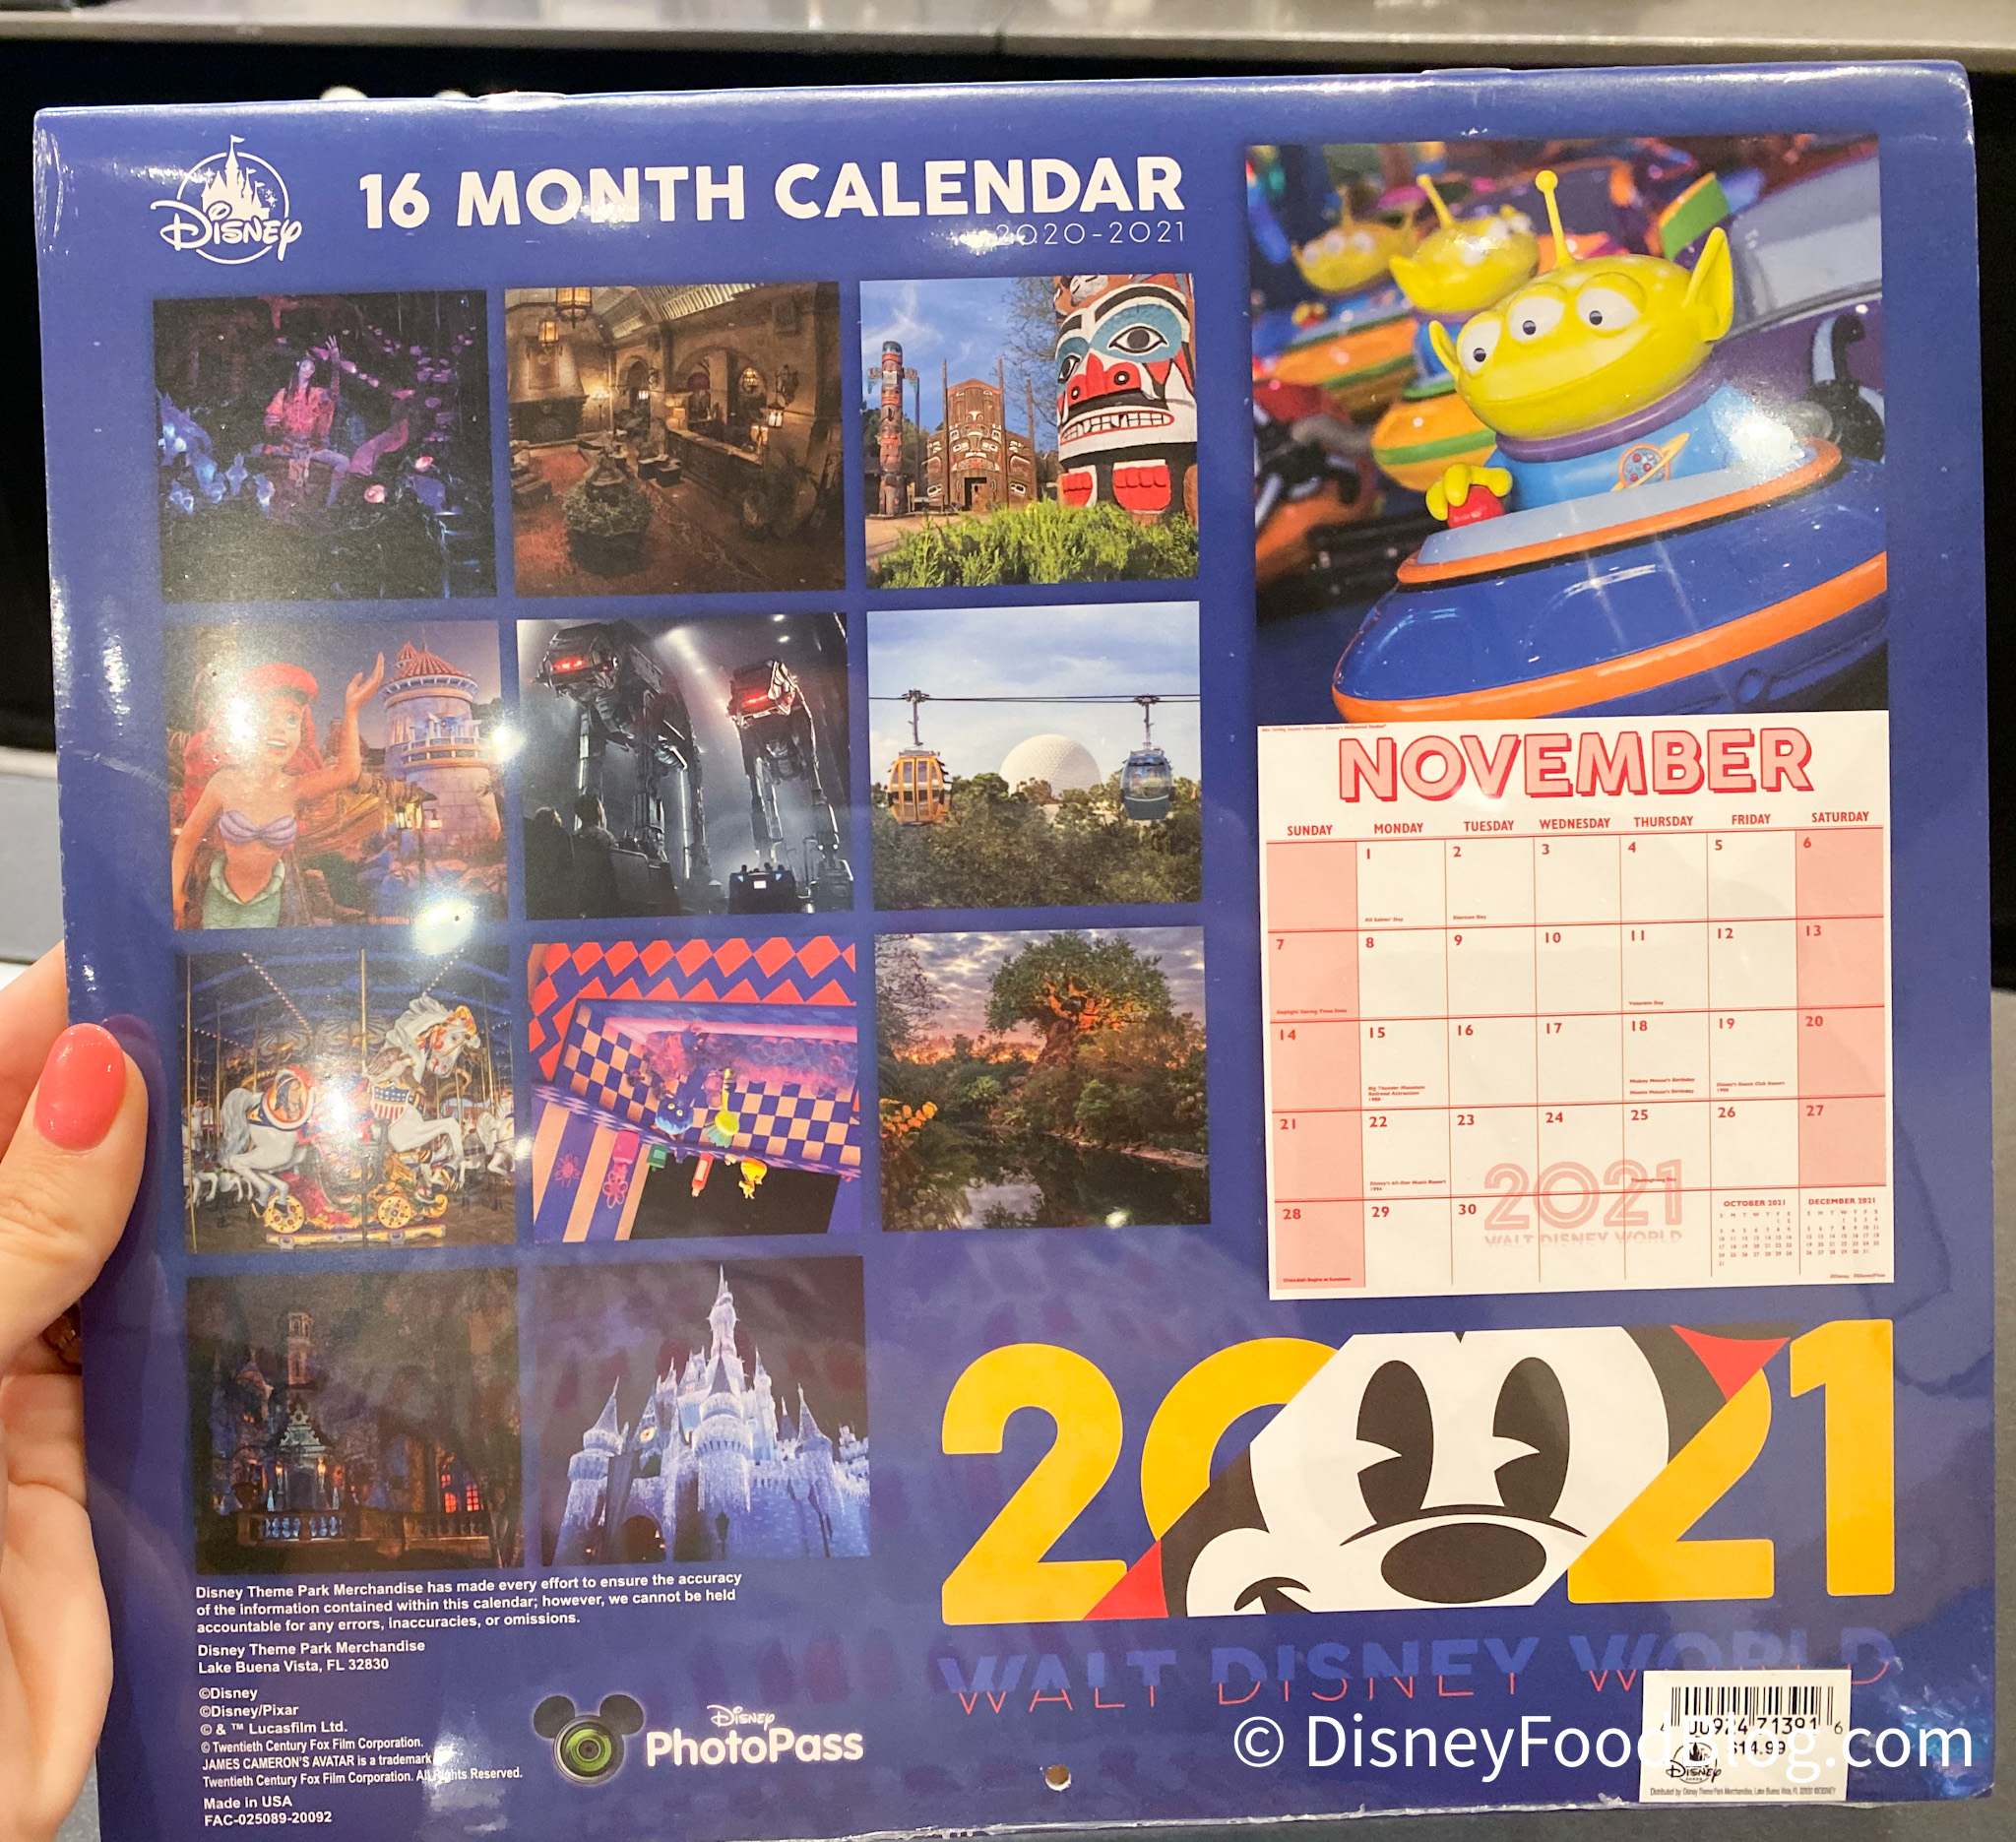 Spotted A New 2020 2021 Calendar Is Now Available In Disney World